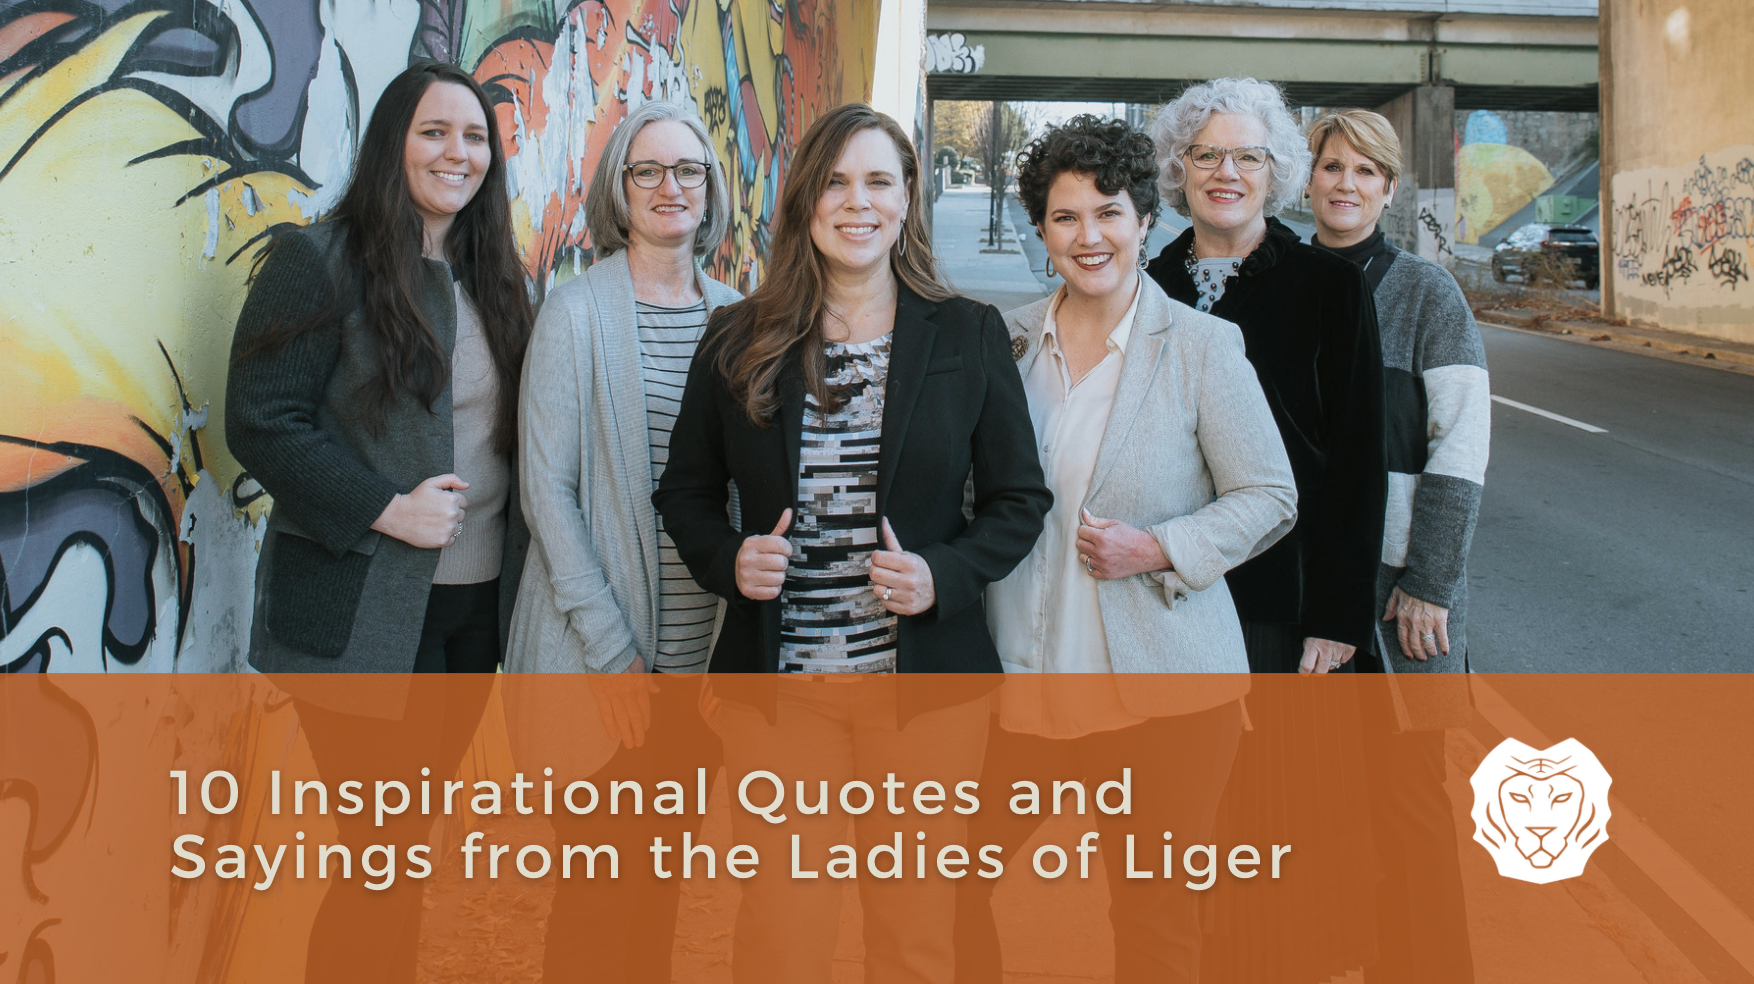 10 Inspirational Quotes and Sayings from the Ladies of Liger